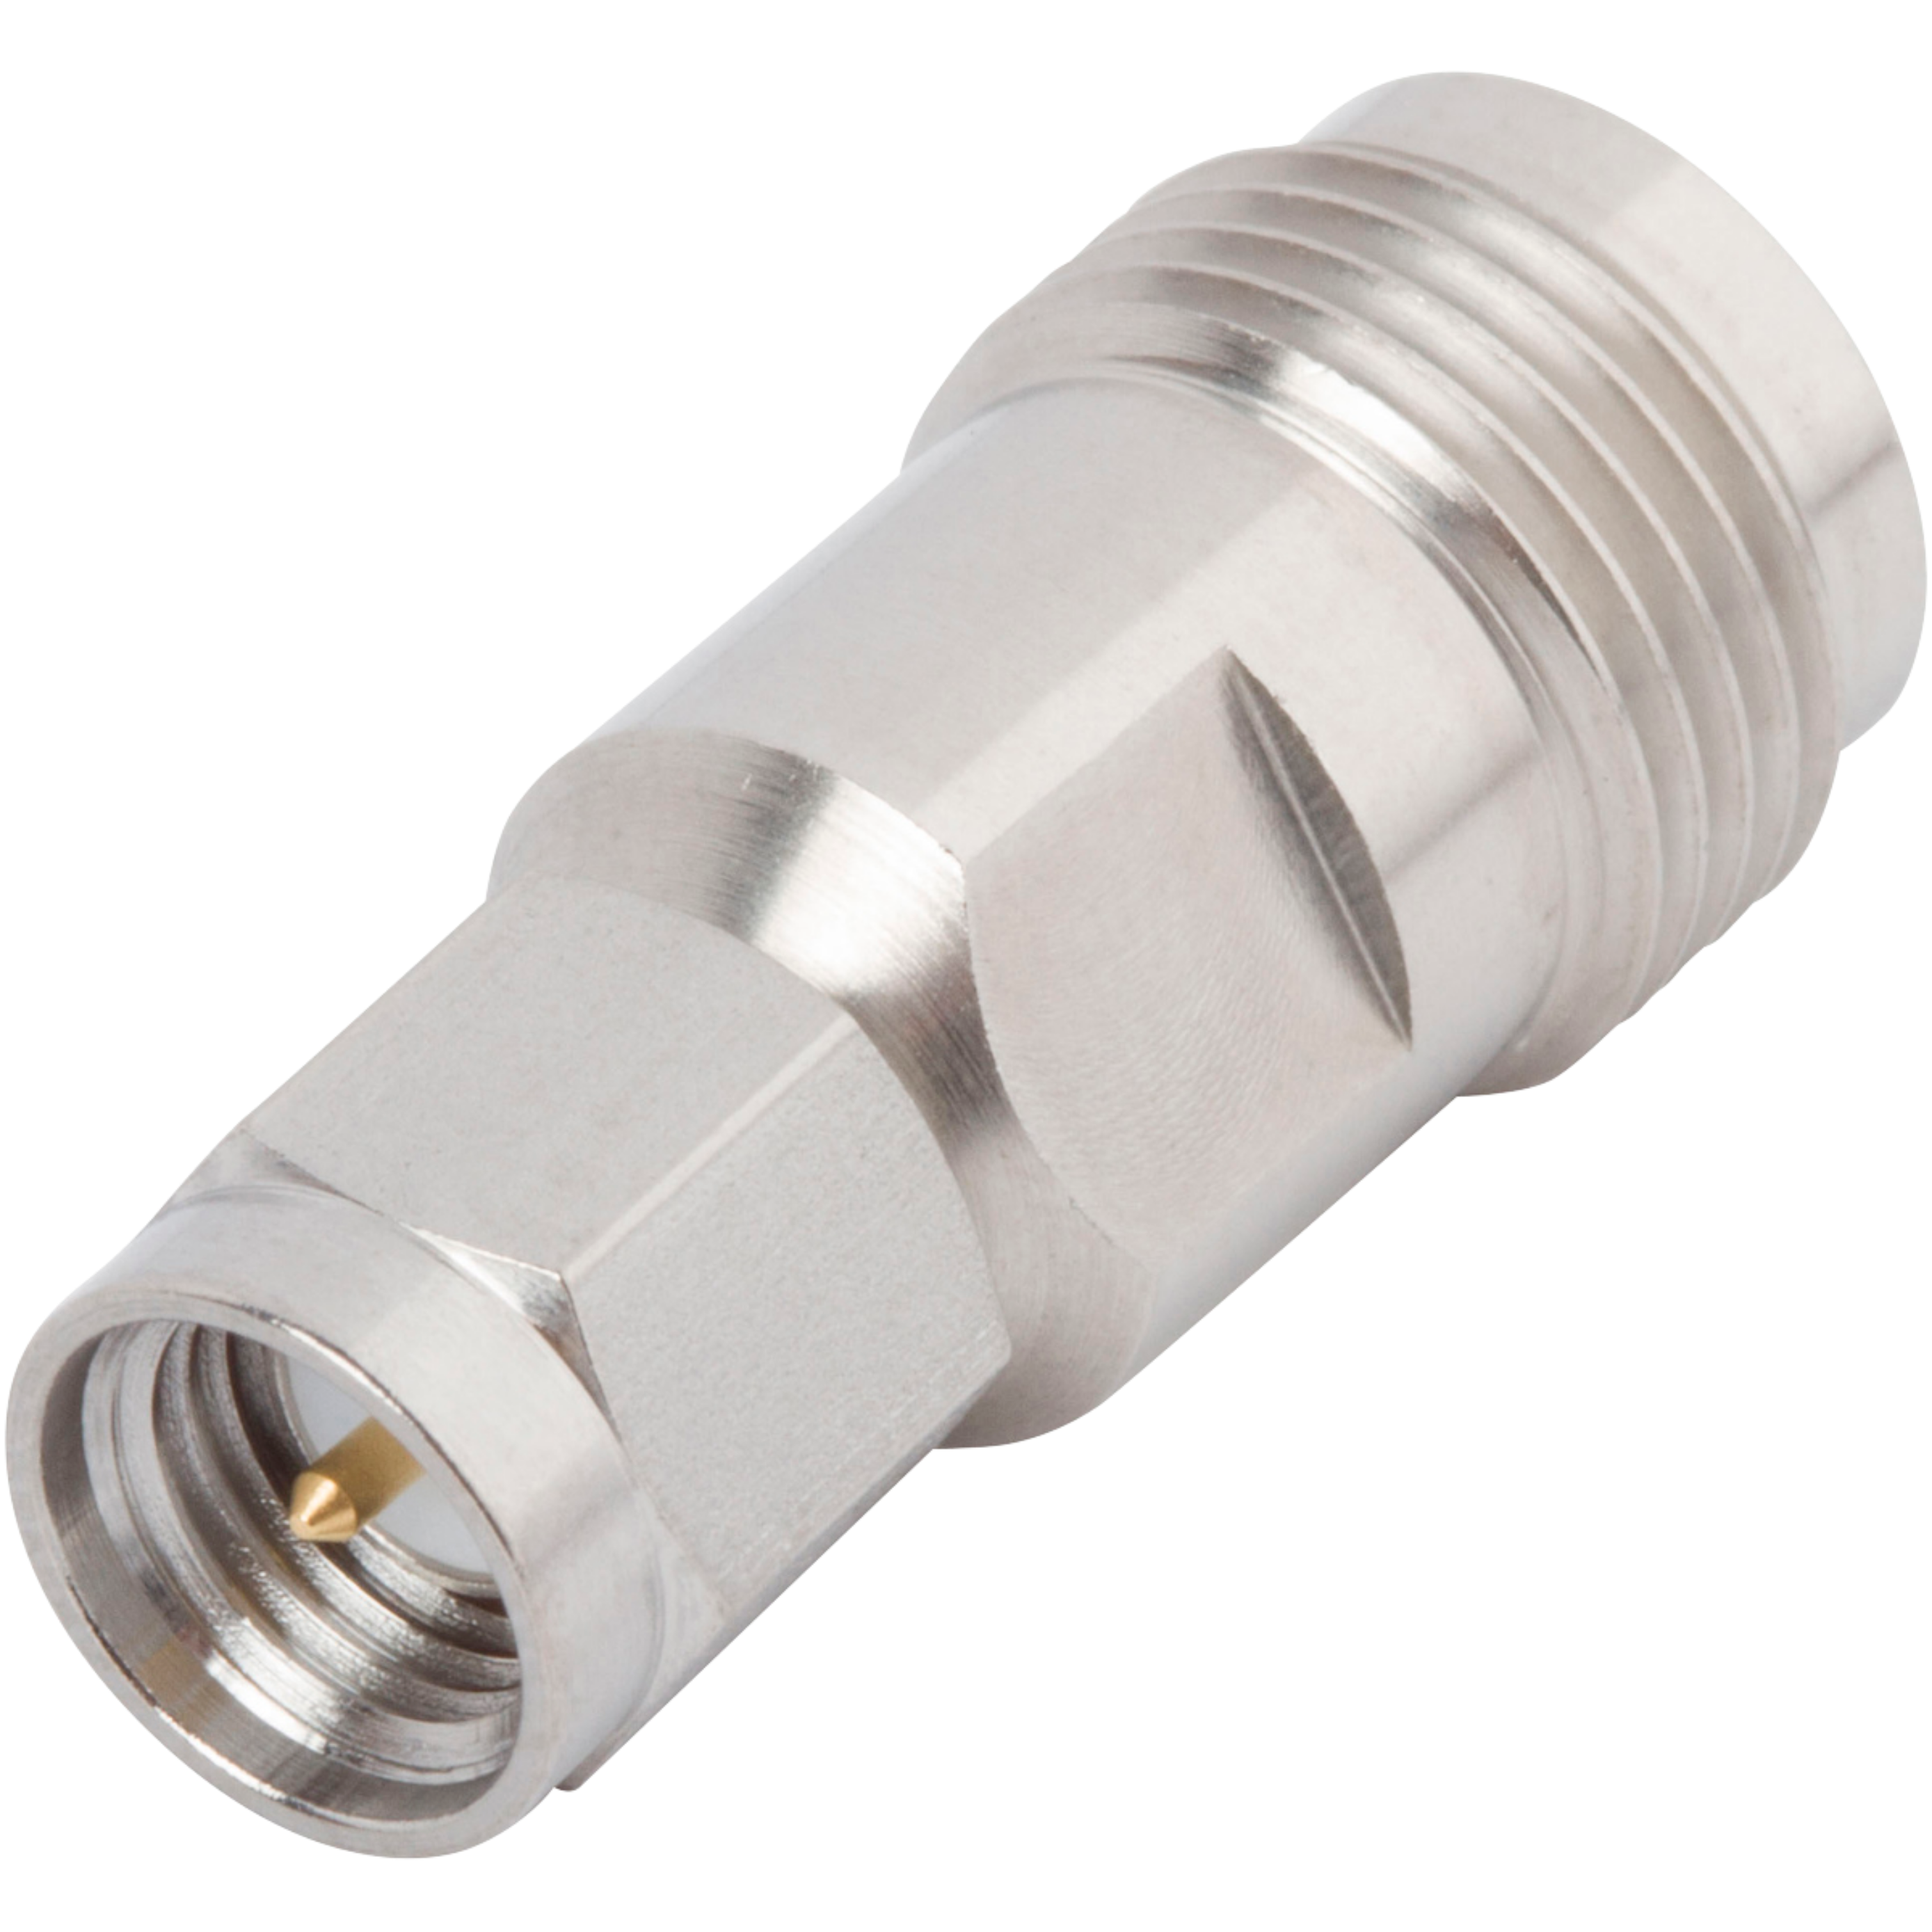 SMA Male to PTNC Female Adapter, SF1108-6001